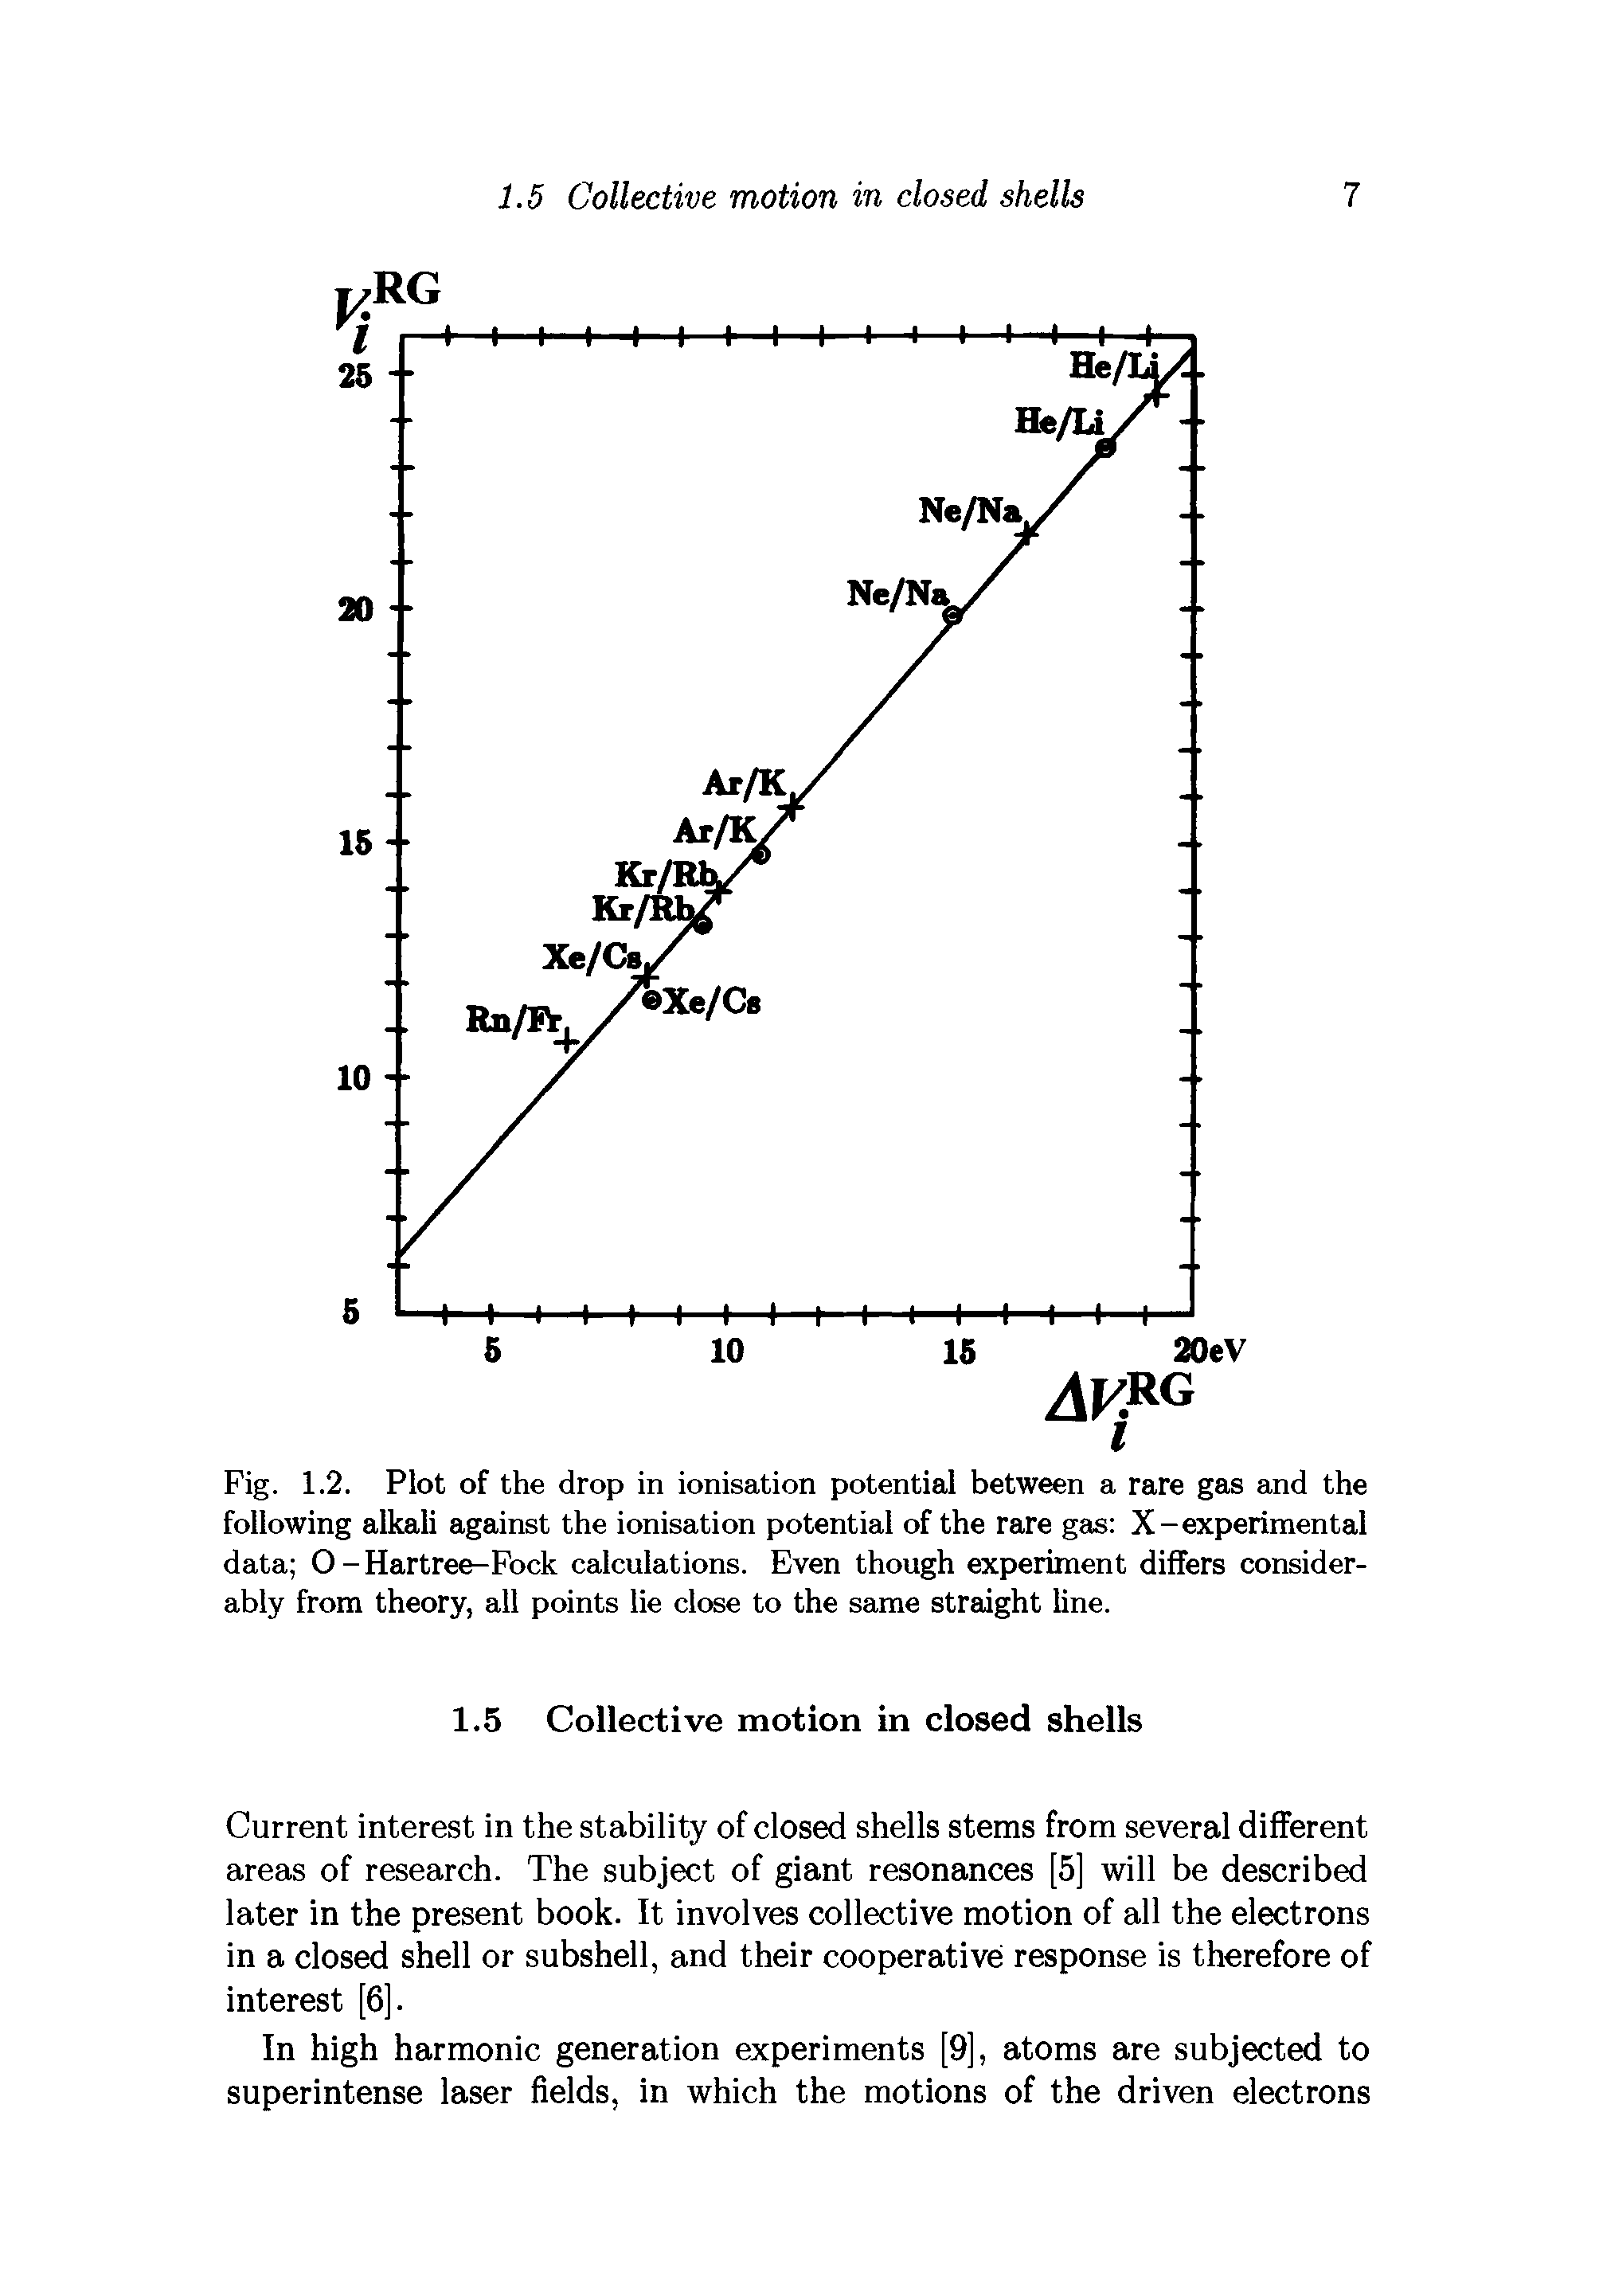 Fig. 1.2. Plot of the drop in ionisation potential between a rare gas and the following alkali against the ionisation potential of the rare gas X-experimental data O - Hartree-Fock calculations. Even though experiment differs considerably from theory, all points lie close to the same straight line.